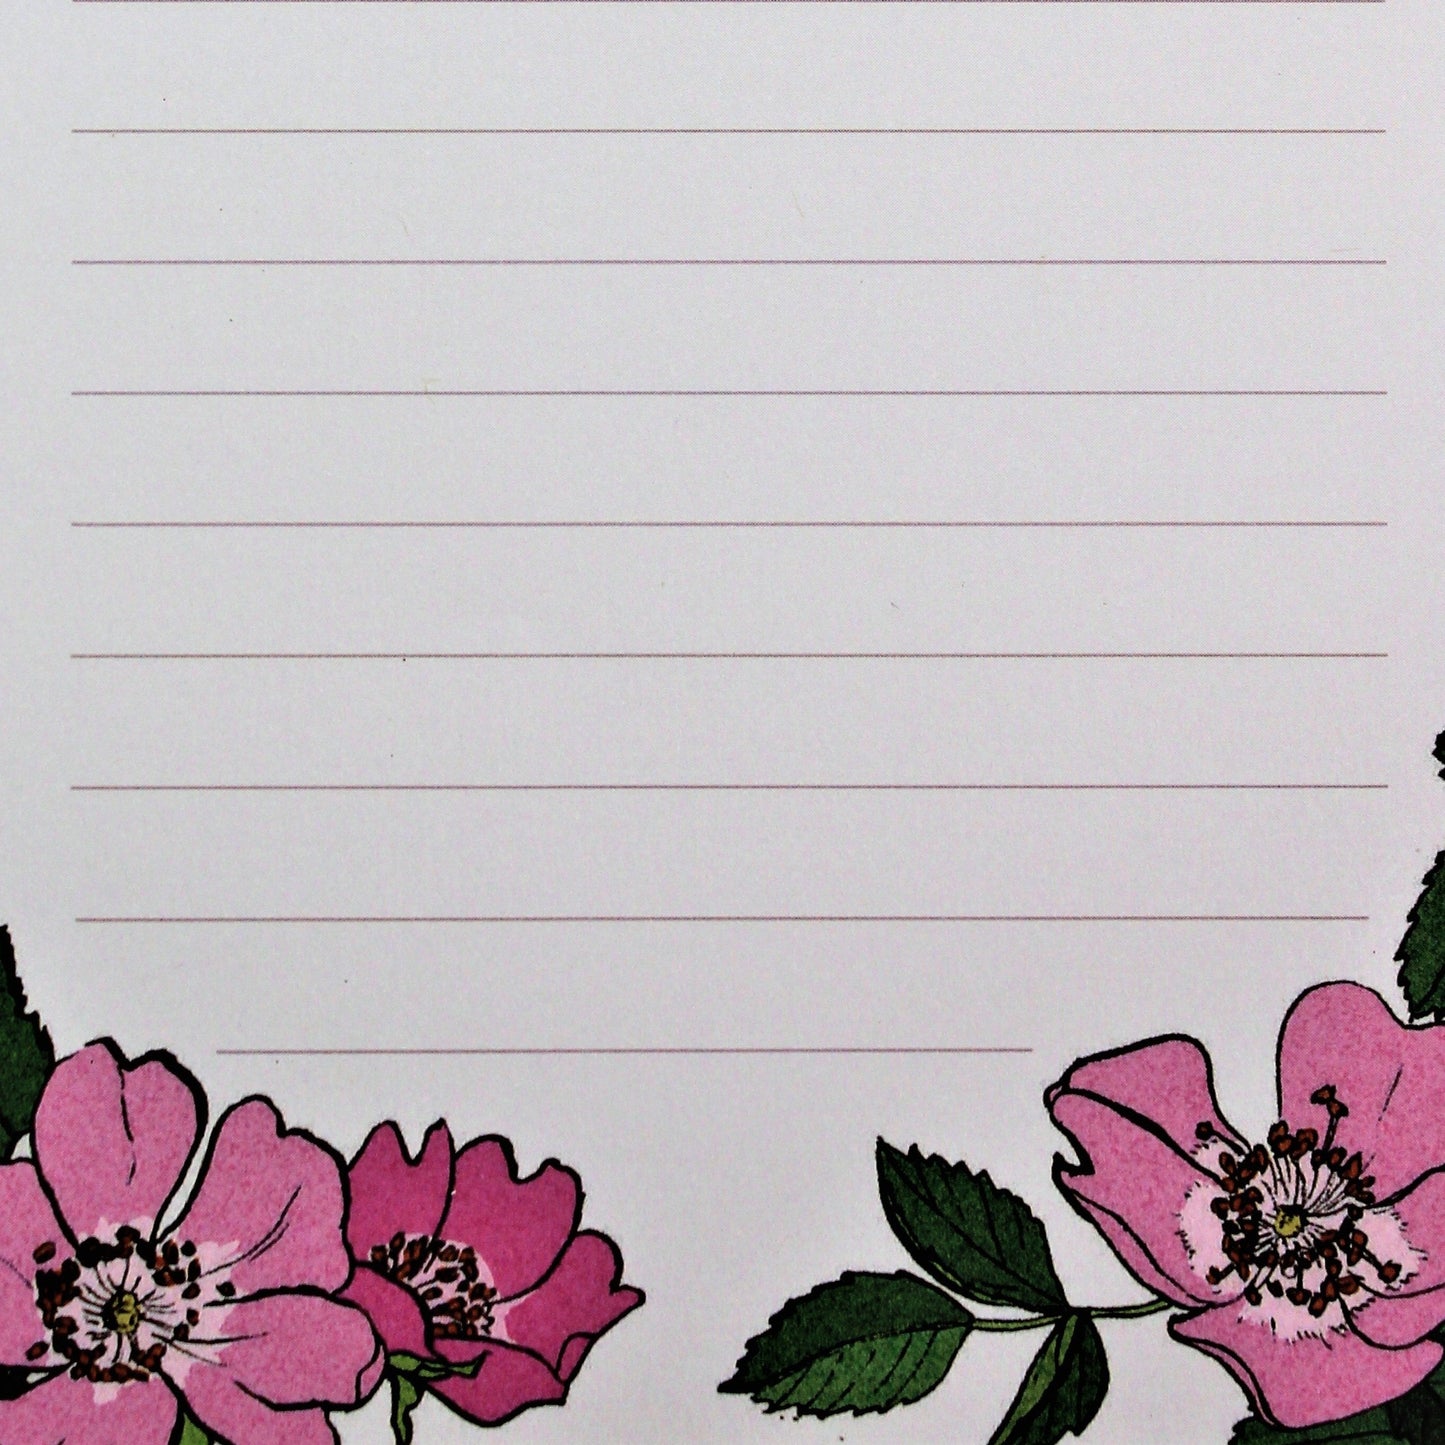 Planting with Nature: Garden To-Do List Notepad